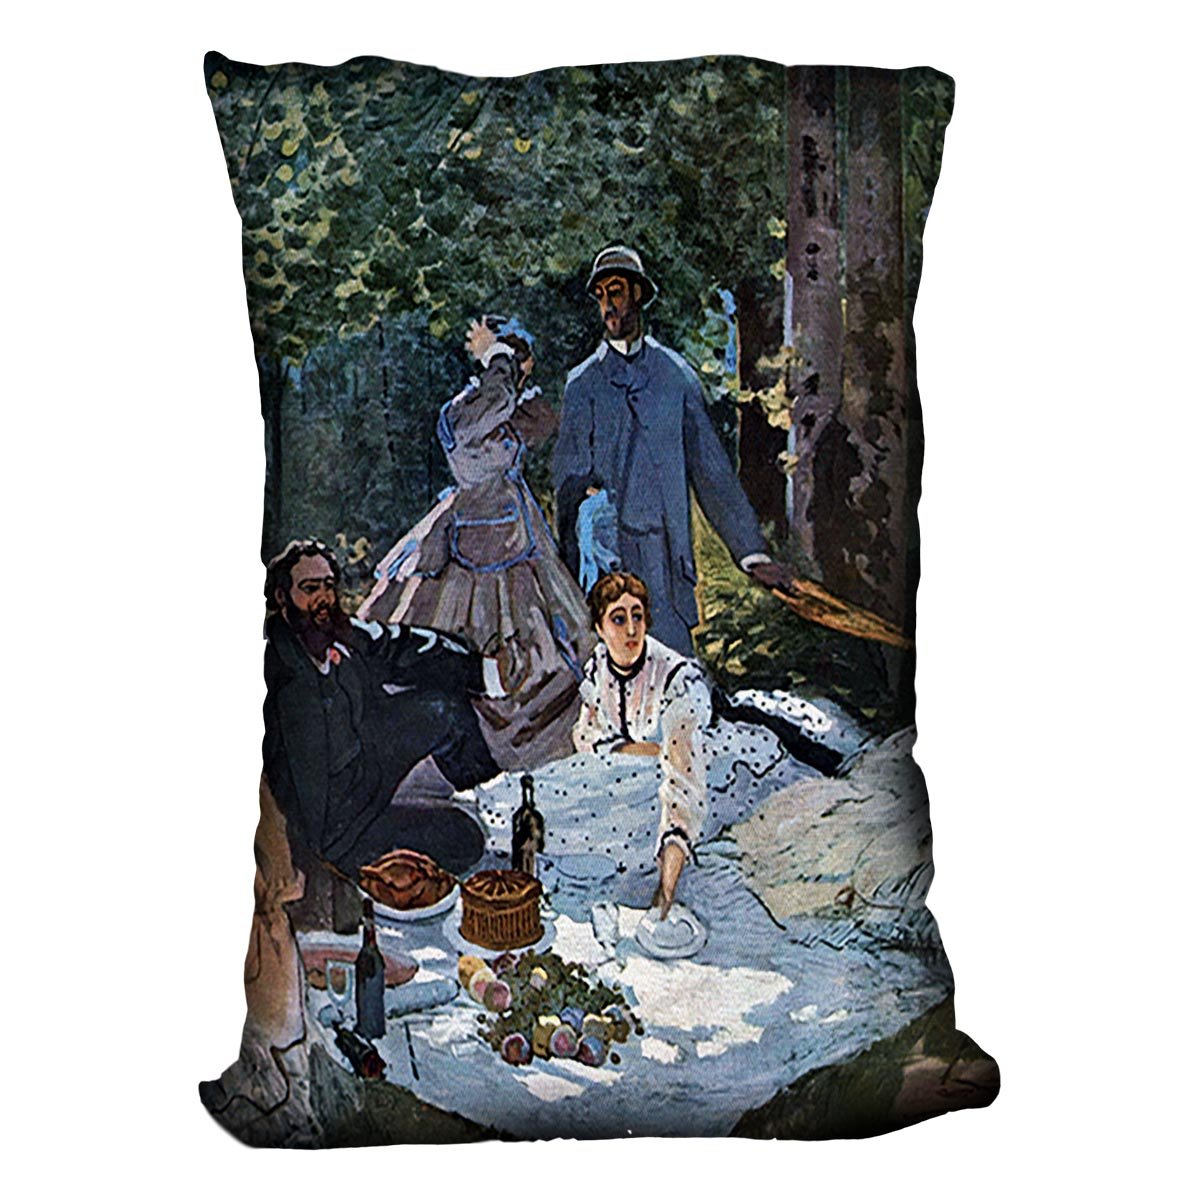 The breakfast outdoors central section by Monet Throw Pillow